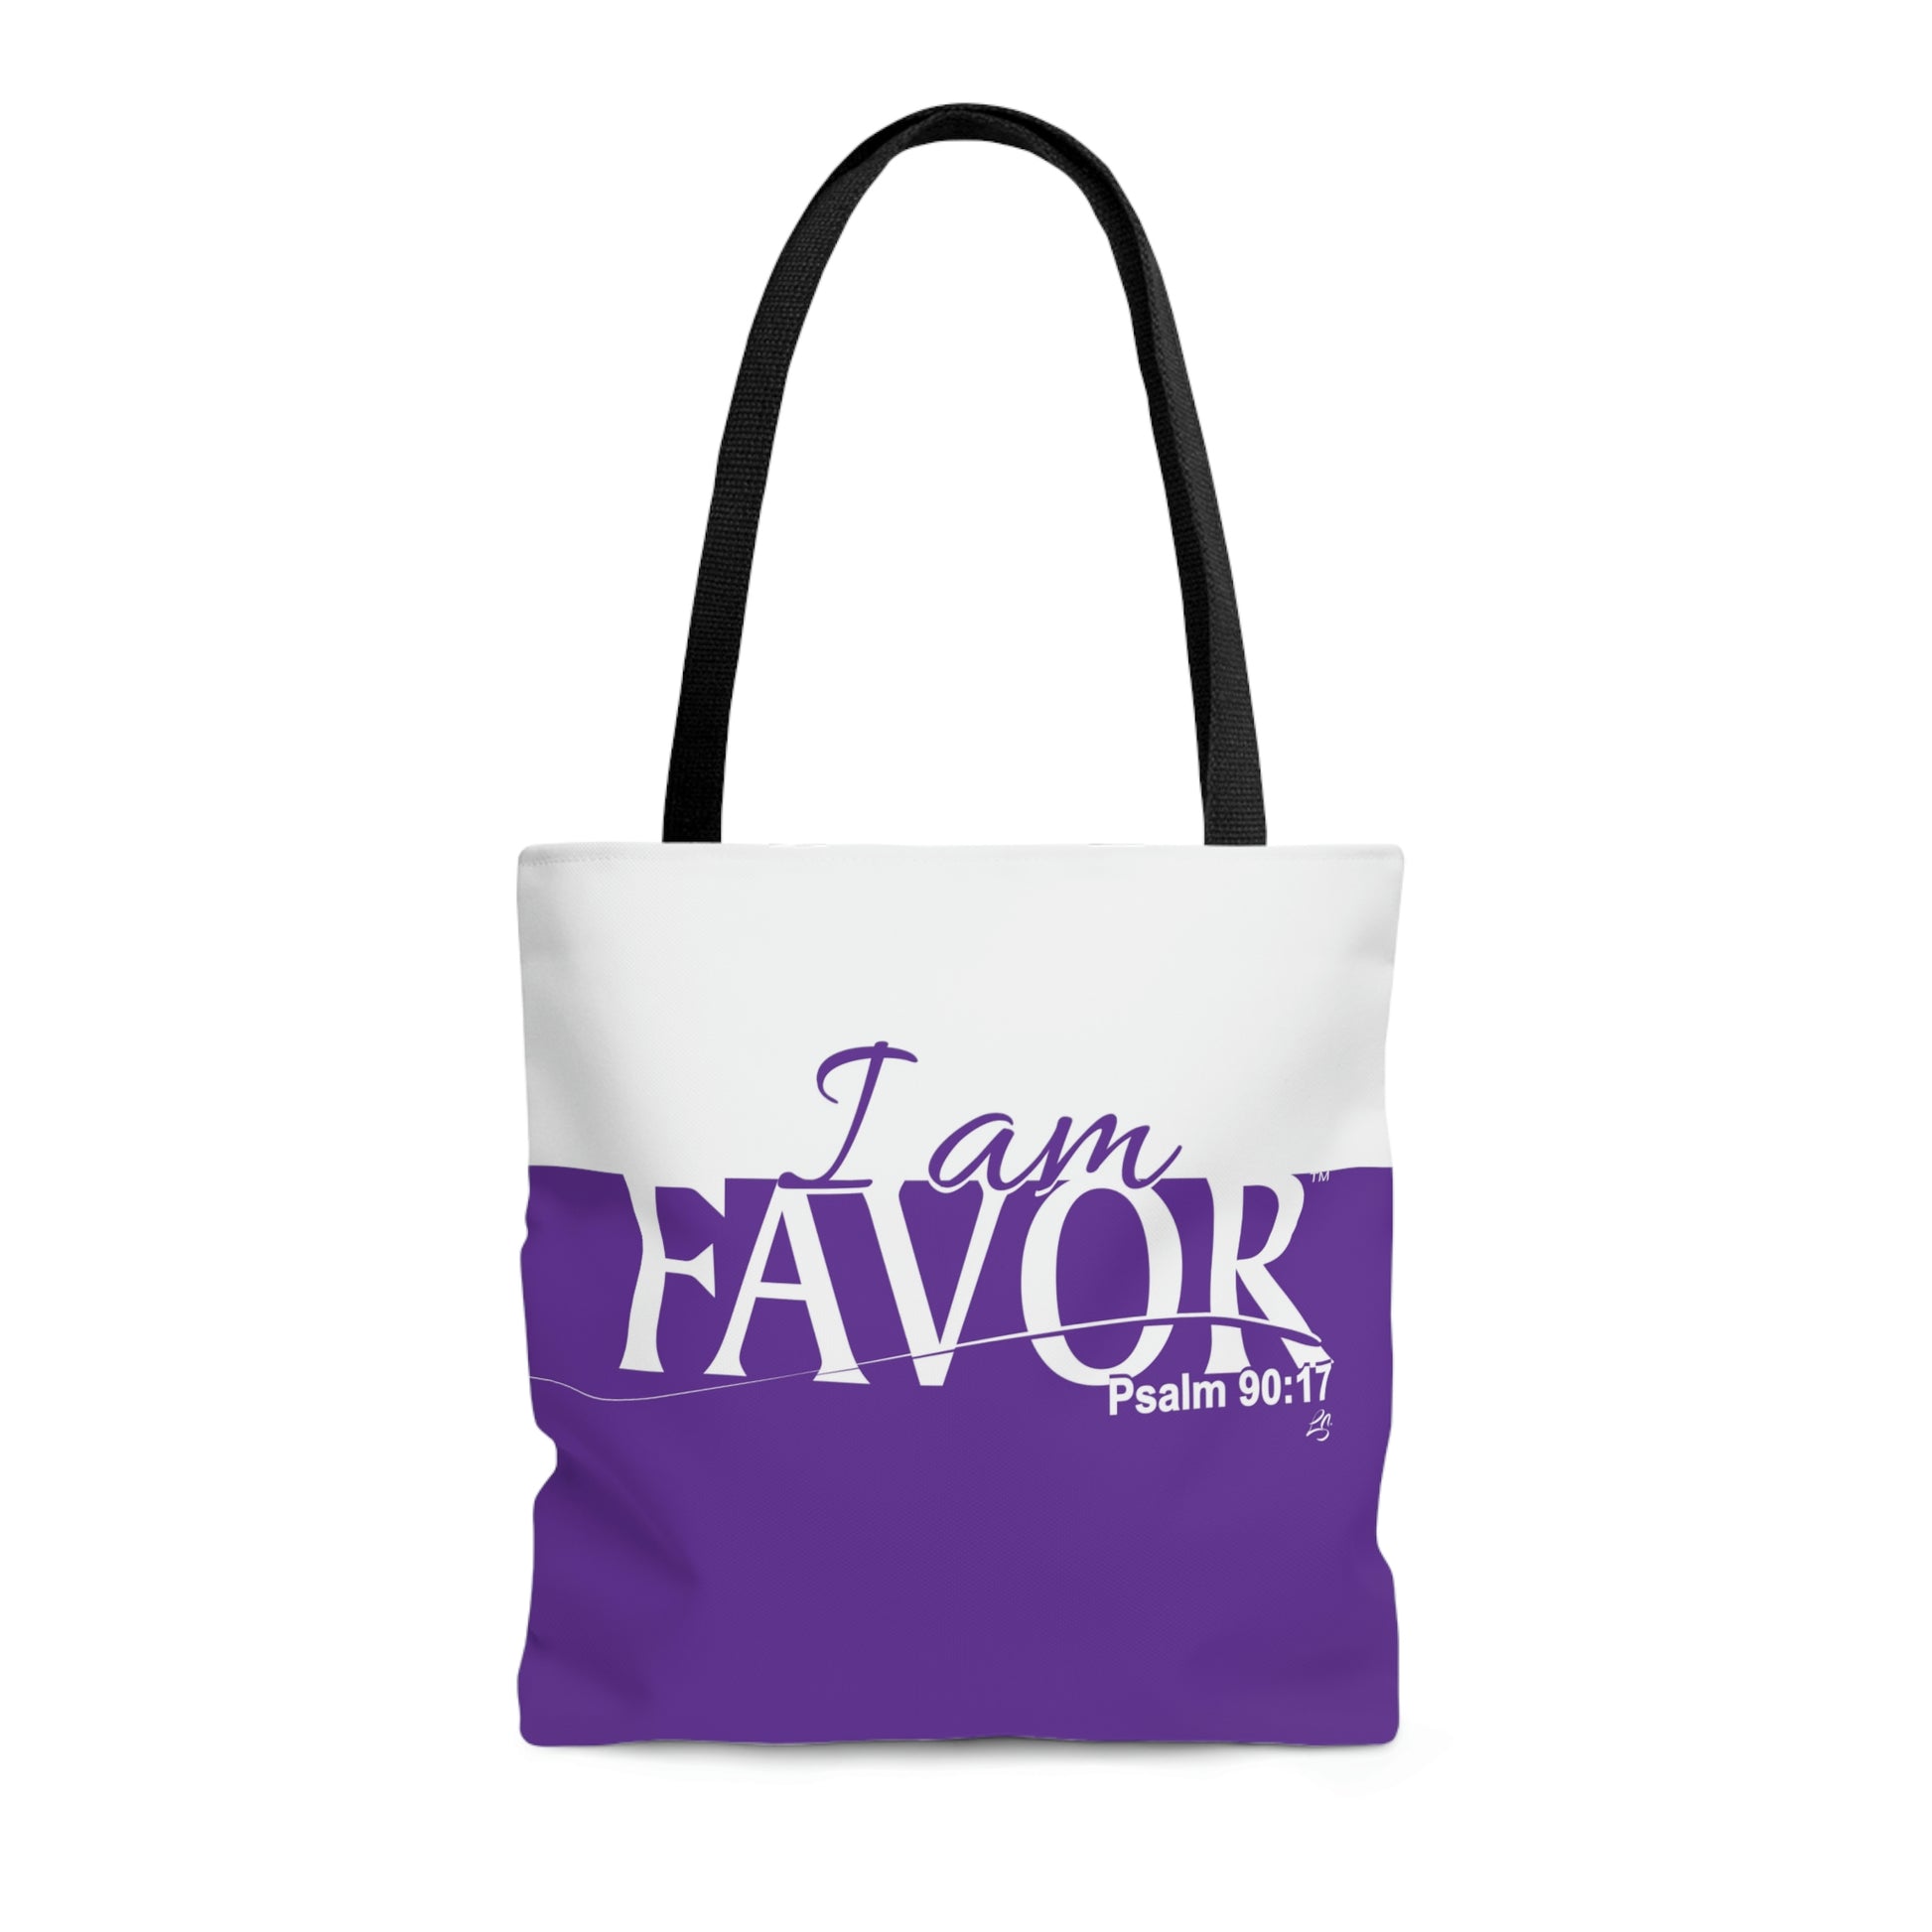 I am FAVOR tote purple and white with black handle